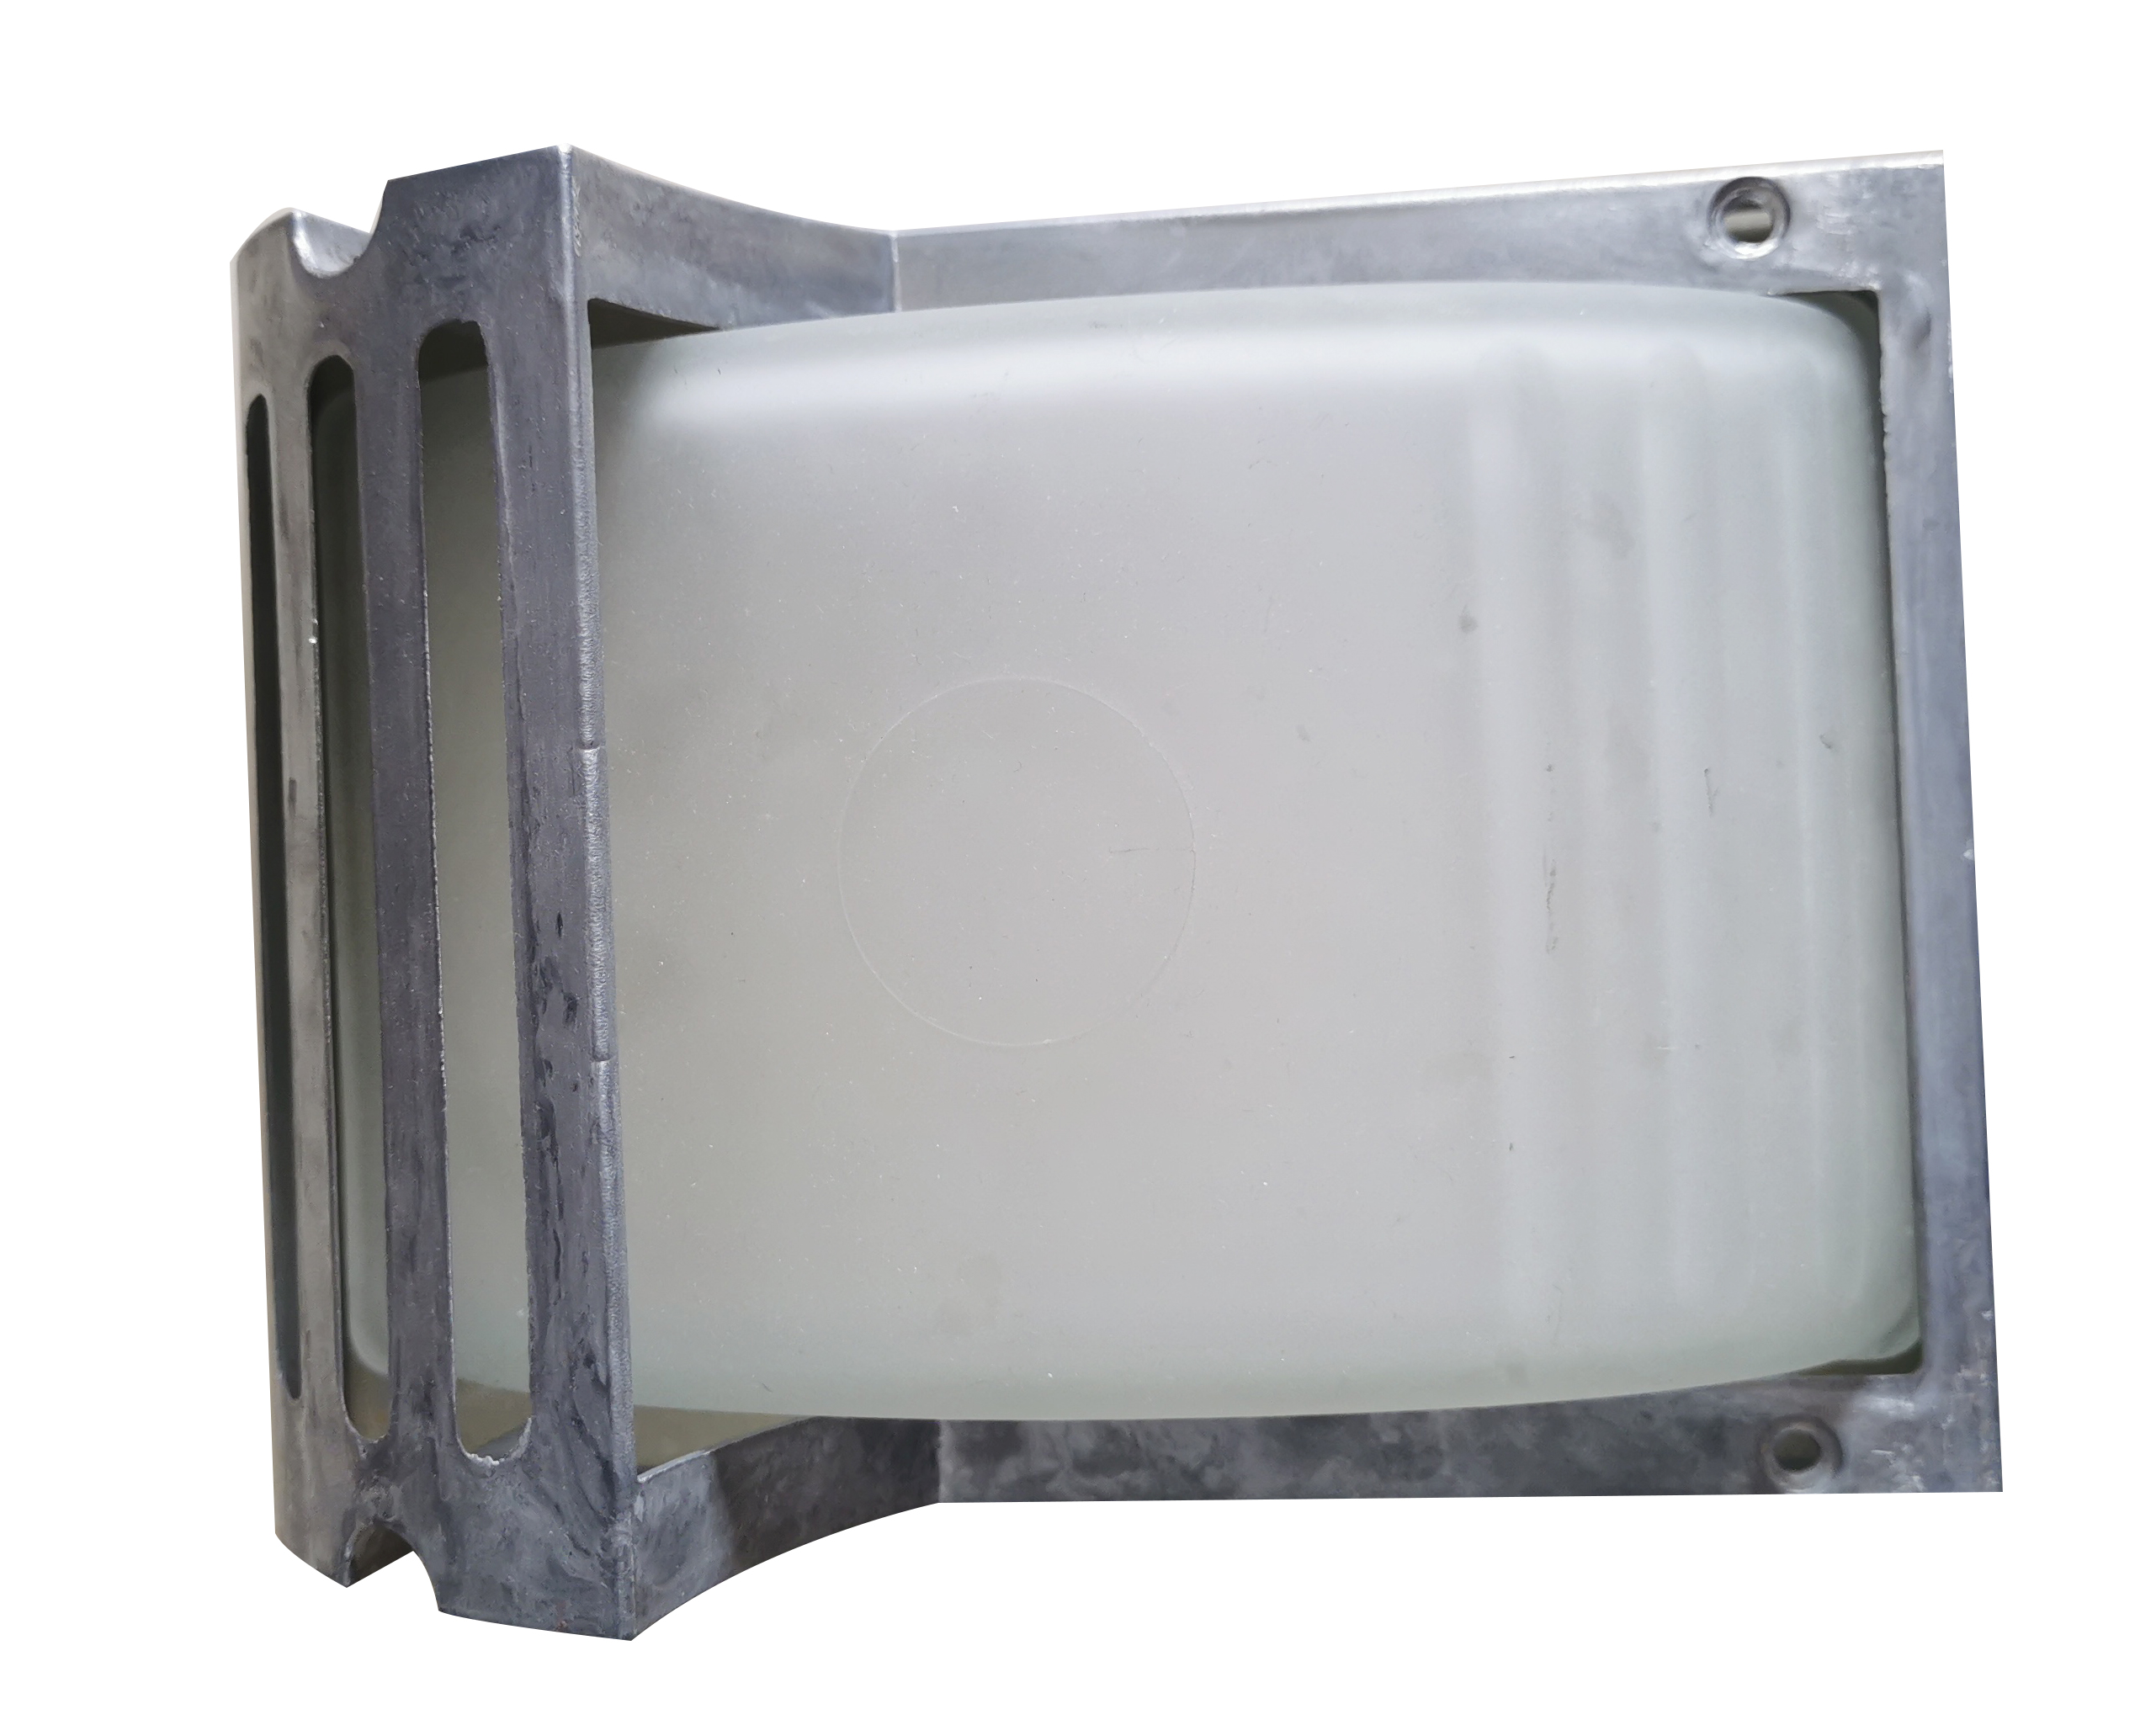 LED WALL LIGHT、NEW PAODUCT